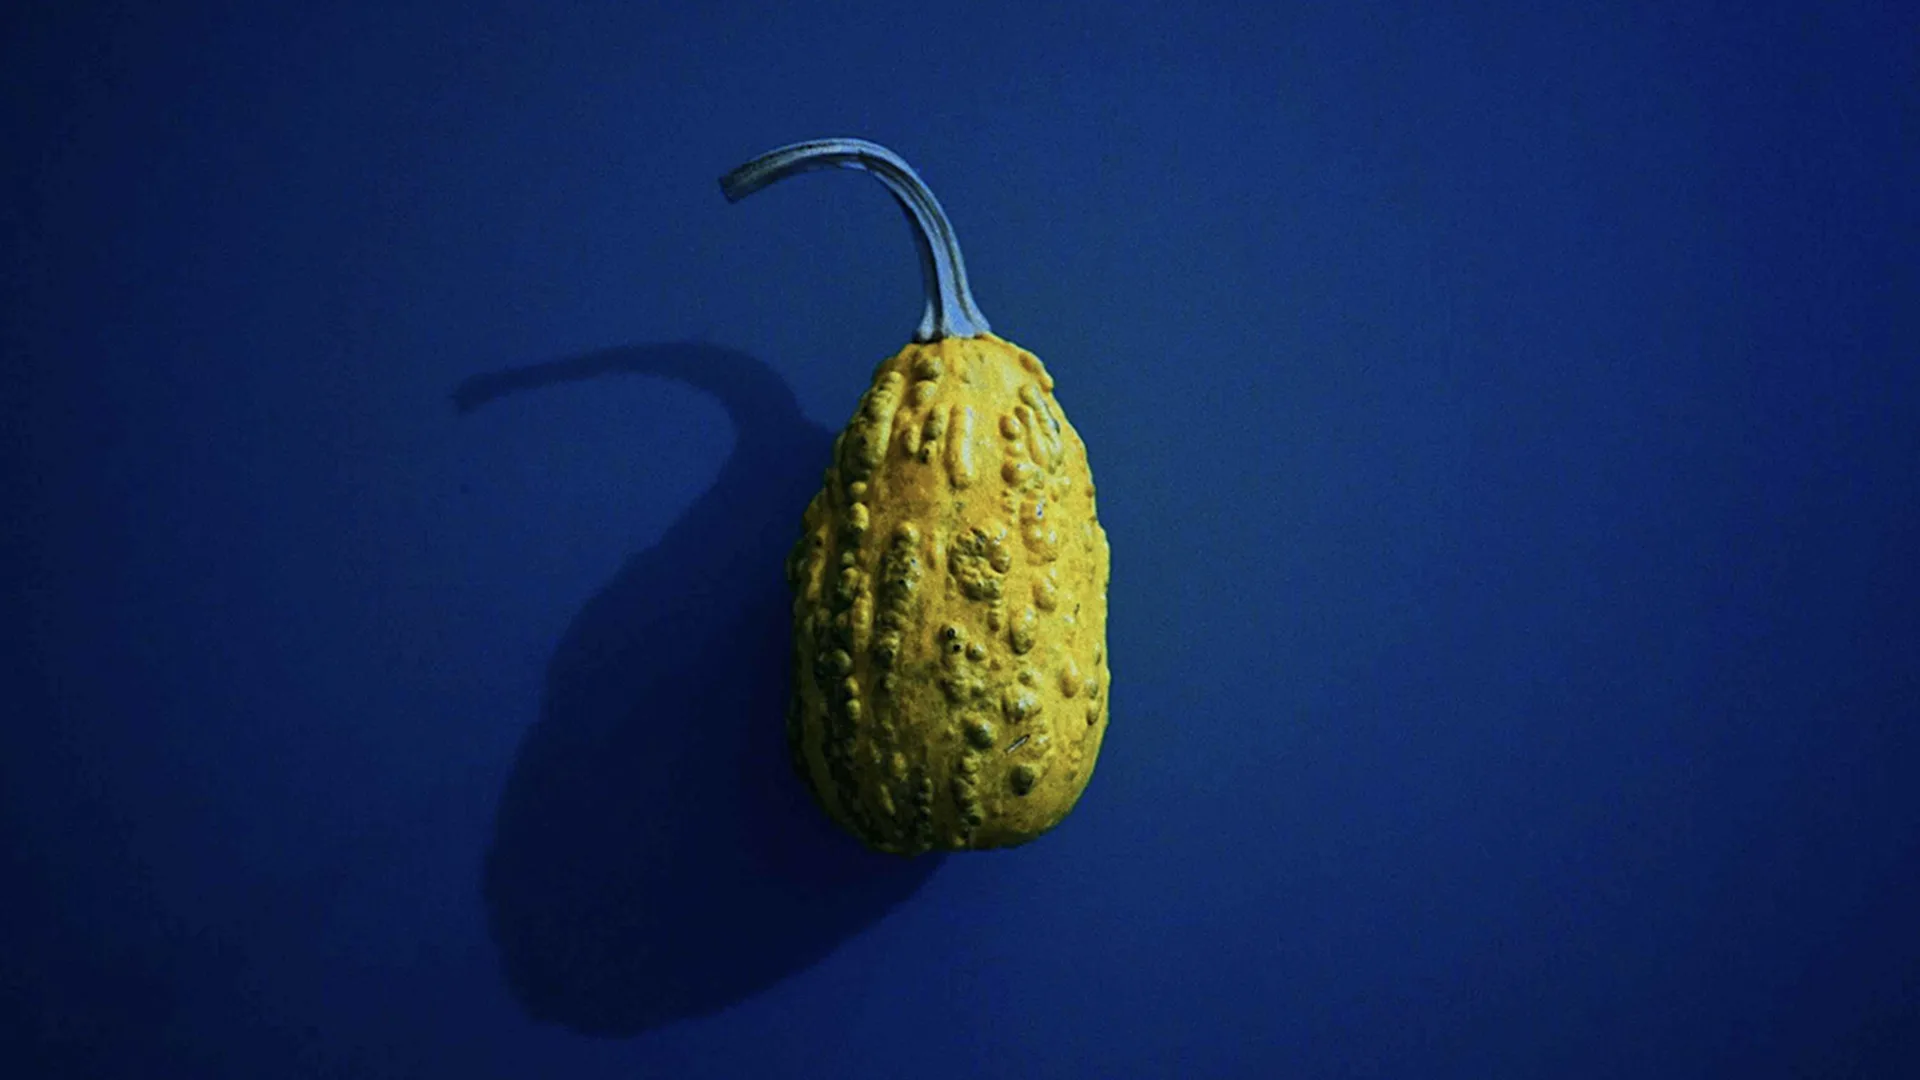 An imperfect squash vegetable